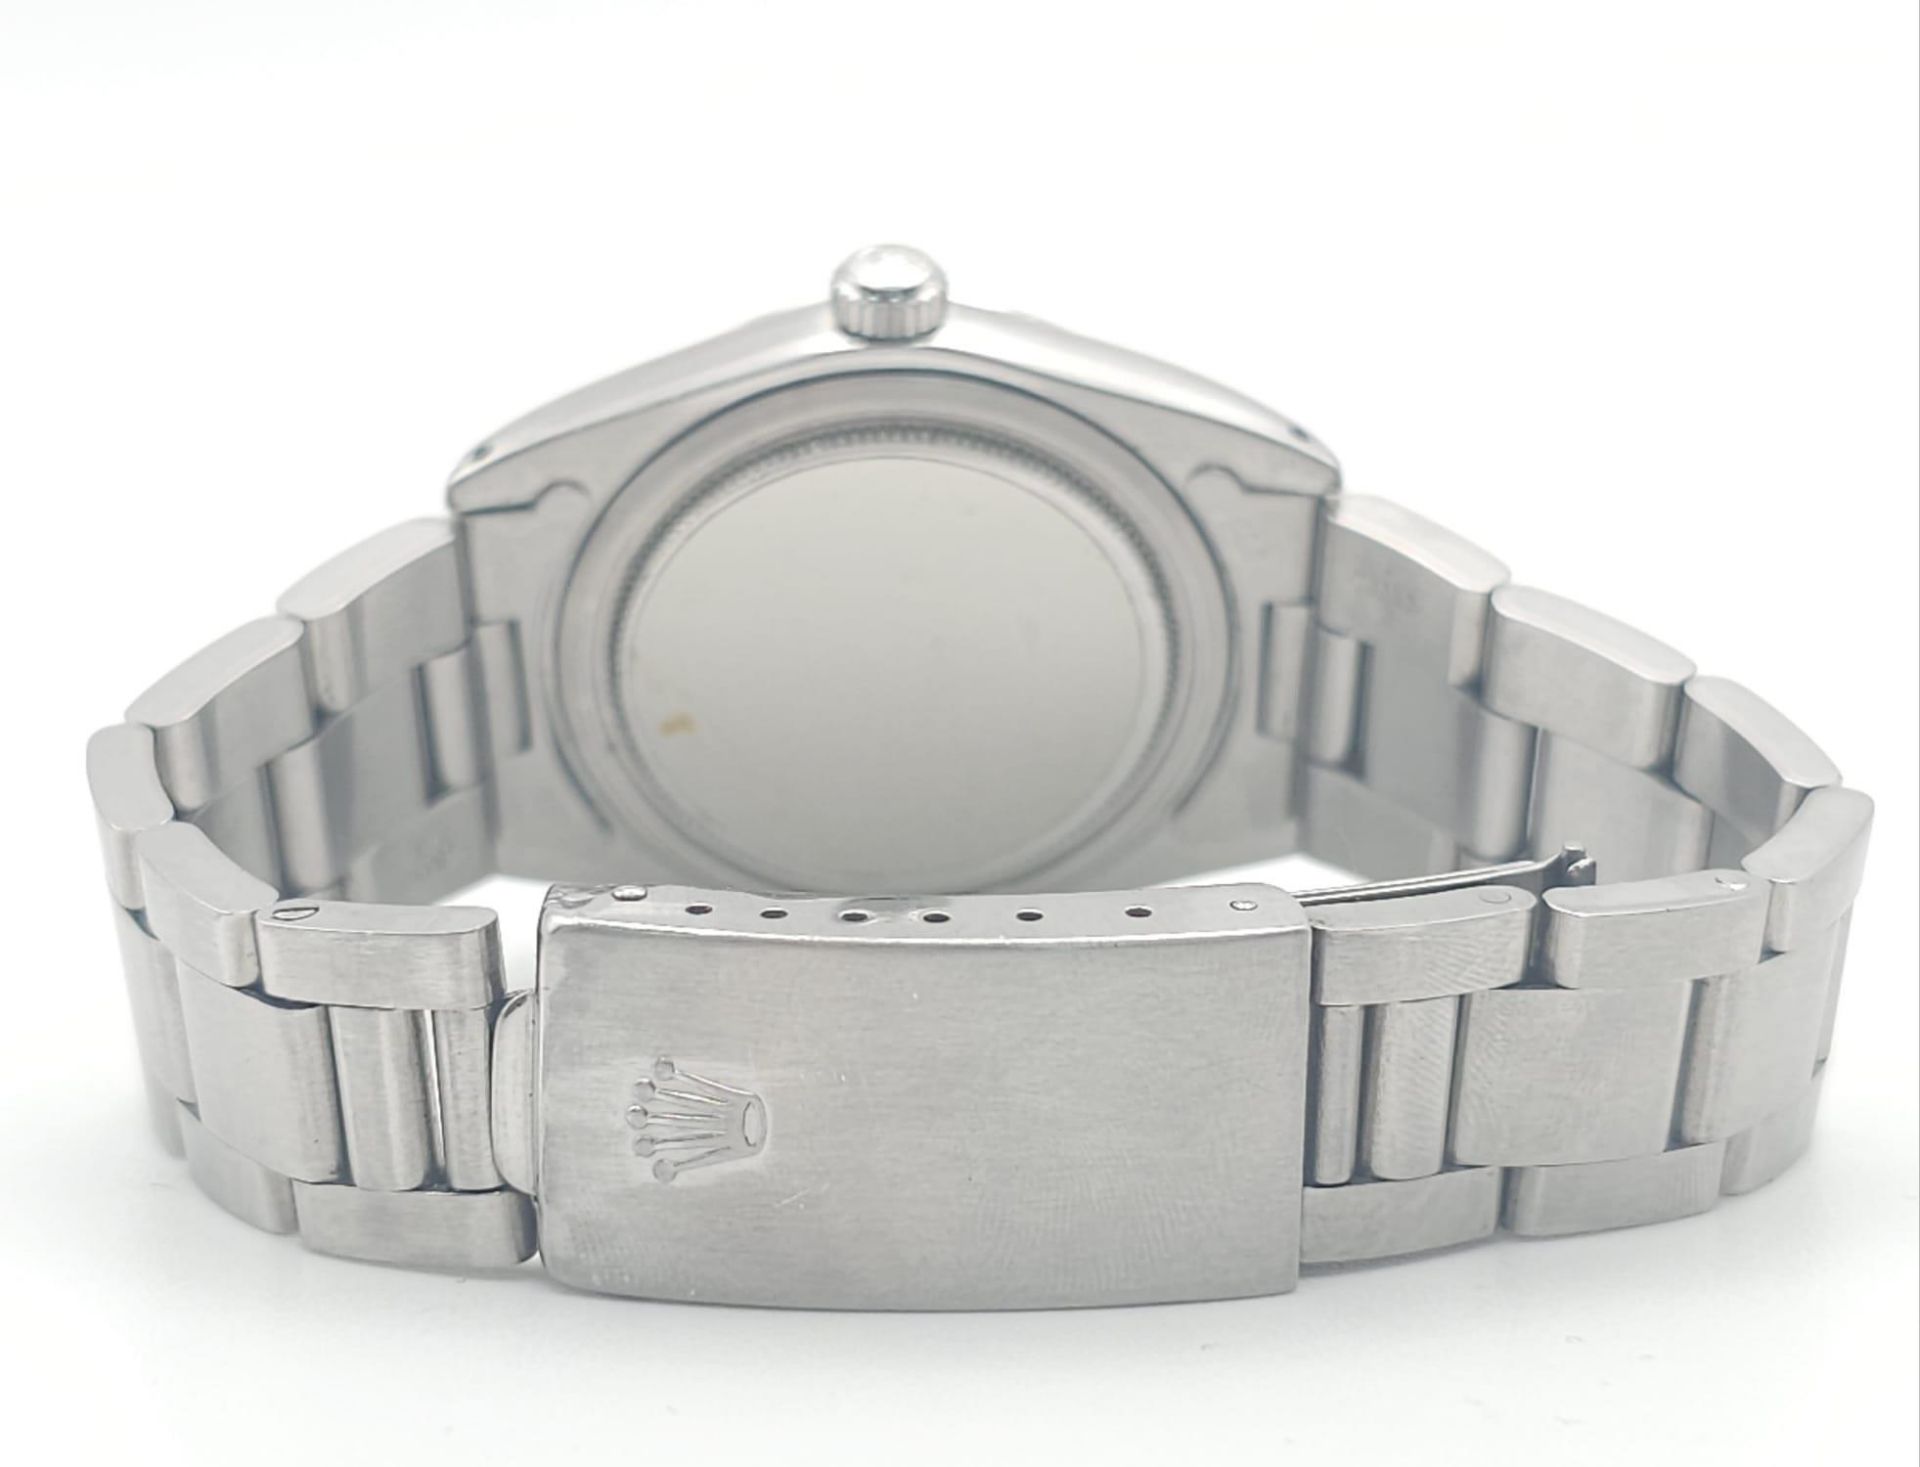 A ROLEX OYSTERDATE IN STAINLESS STEEL SPORTING THE EAGLE LOGO OF ABU DHABI .(DIAL NEEDS CLEANING) - Image 7 of 13